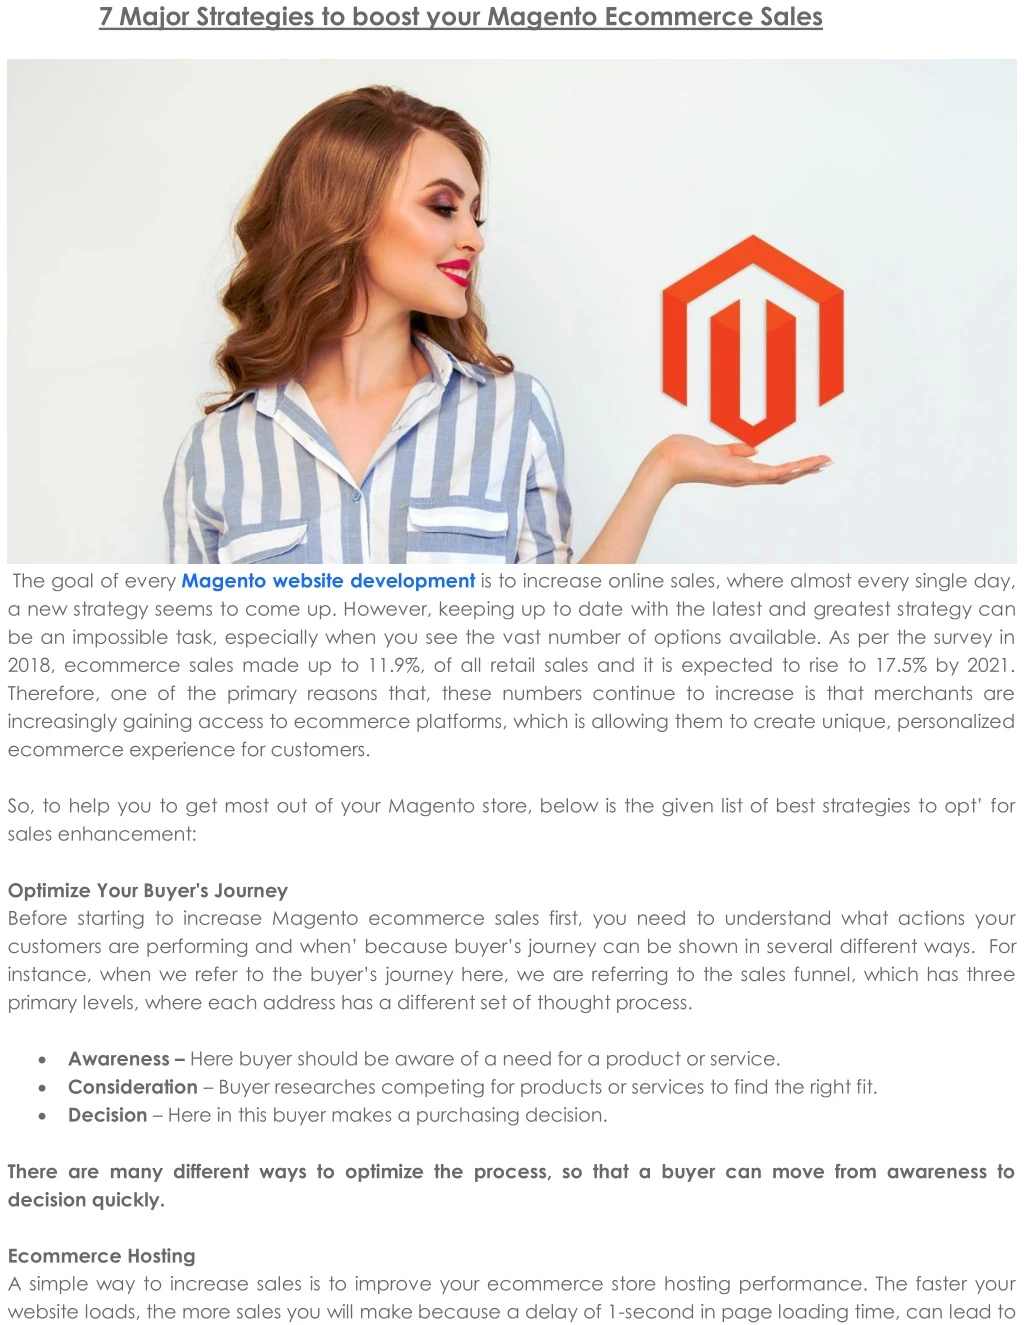 7 major strategies to boost your magento